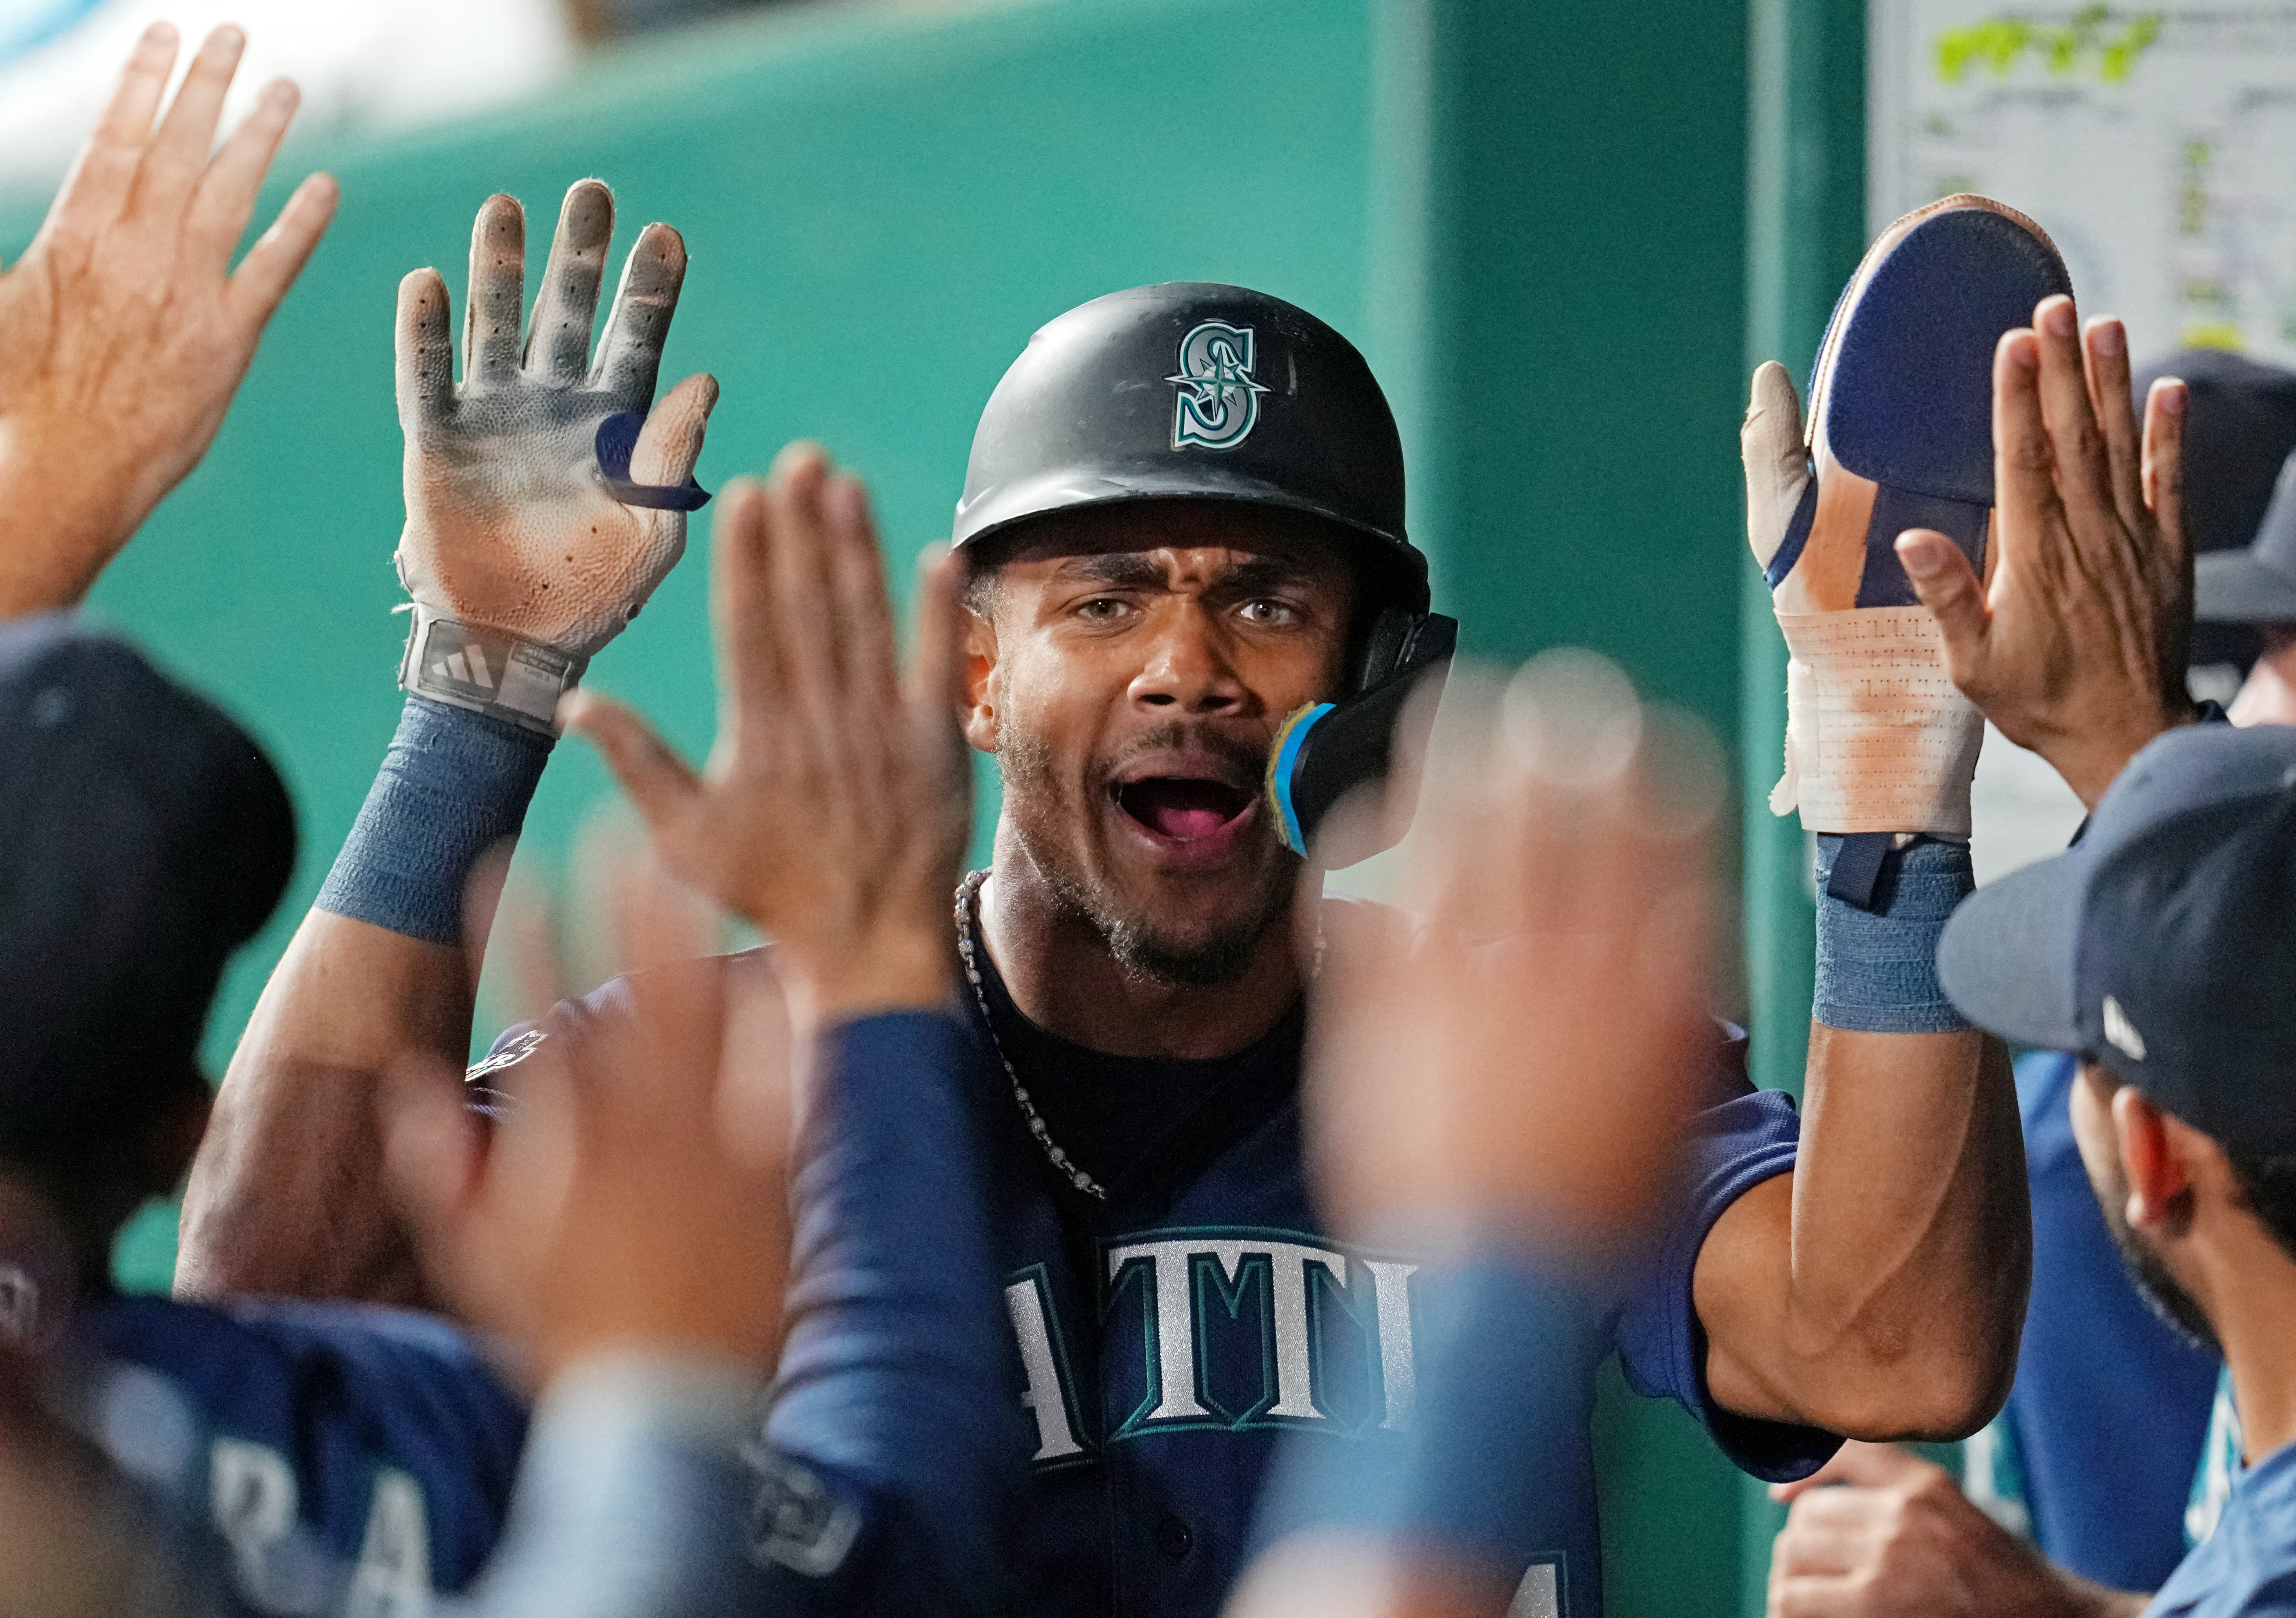 Mariners un-nicely lose to Royals, 6-9 - Lookout Landing